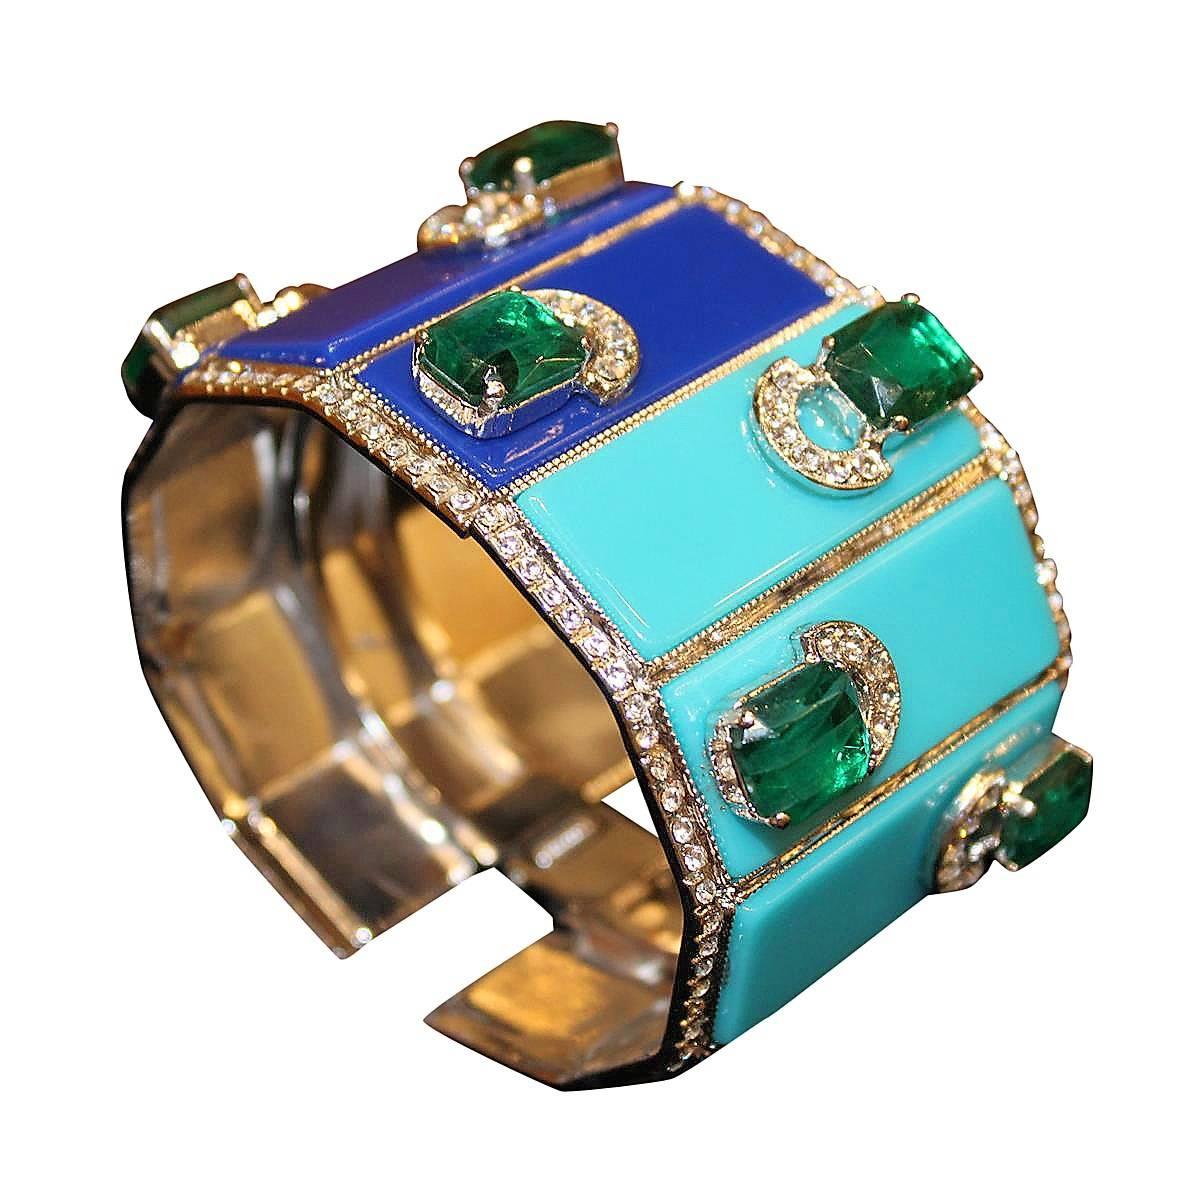 Wonderful bracelet by Carlo Zini MIlano
One of the world's greatest bijoux designers
Non allergenic rhodium
Amazing hand creation of crystals, rhinestones and blue and turquoise resins
Total width cm 4,5 (1.77 inches)
Wrist cm 17 (6.69 inches)
100%